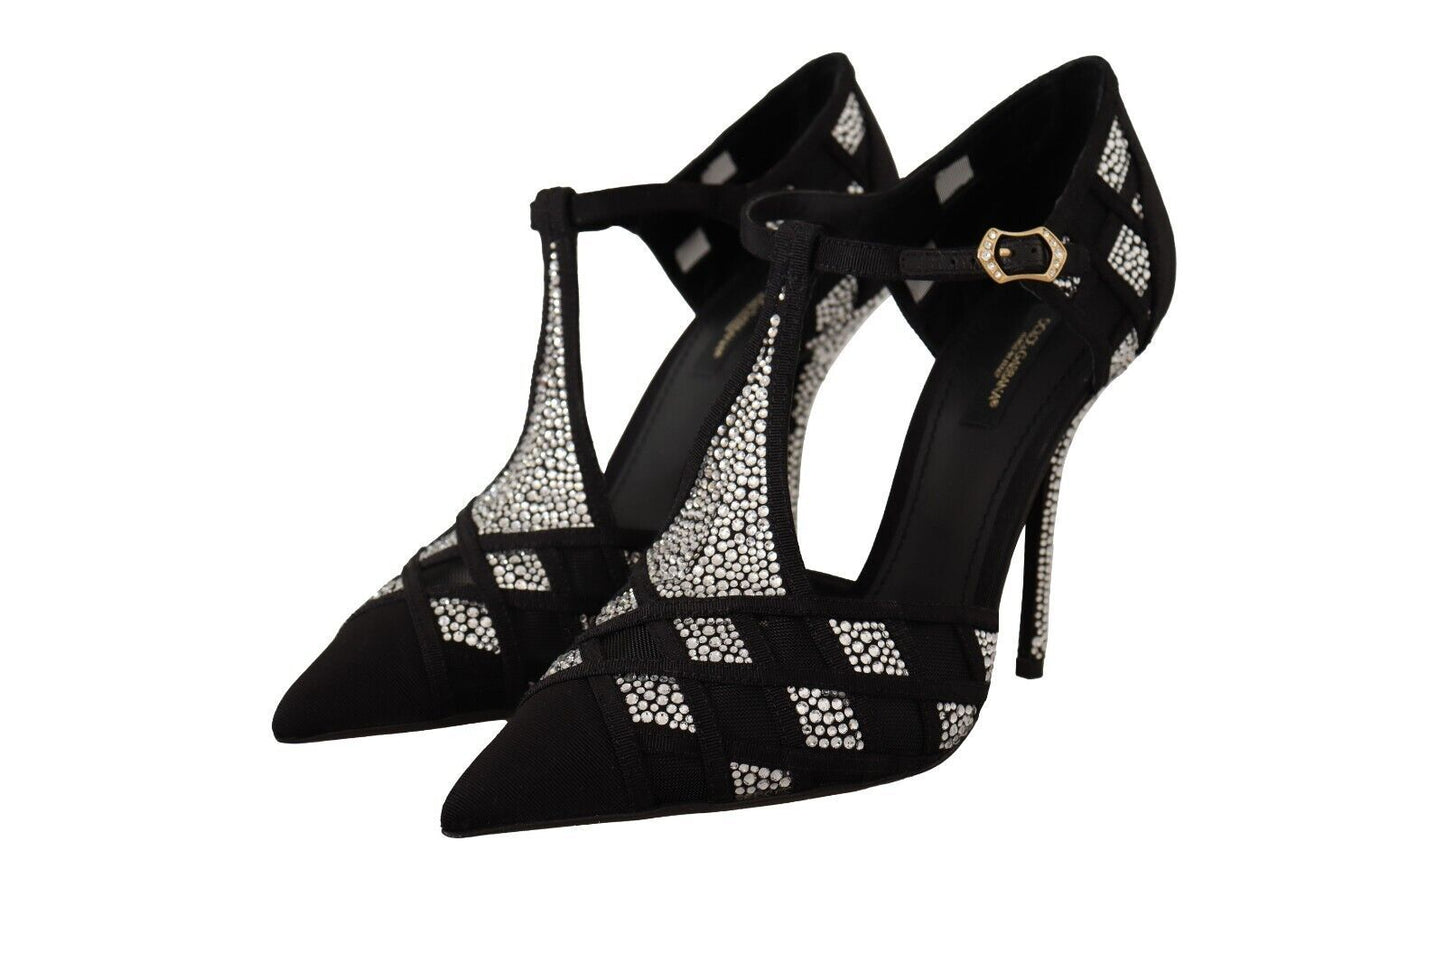 Dolce & Gabbana Black Crystals T-STrap talons pompes chaussures